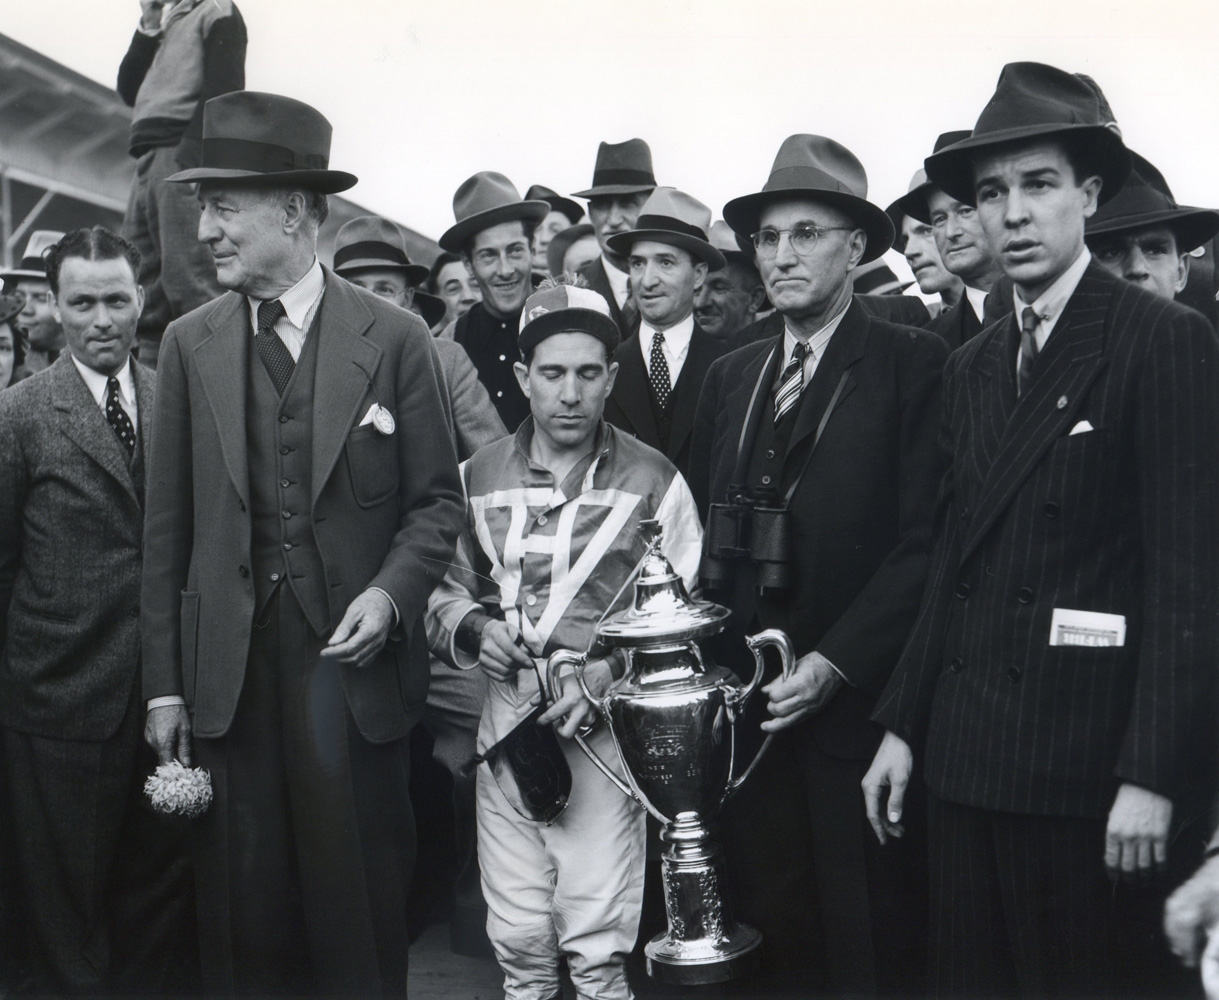 George Woolf and Tom Smith hold the Pimlico Special trophy with Alfred G. Vanderbilt on the right and owner Charles S. Howard on the left (Keeneland Library Morgan Collection/Museum Collection)